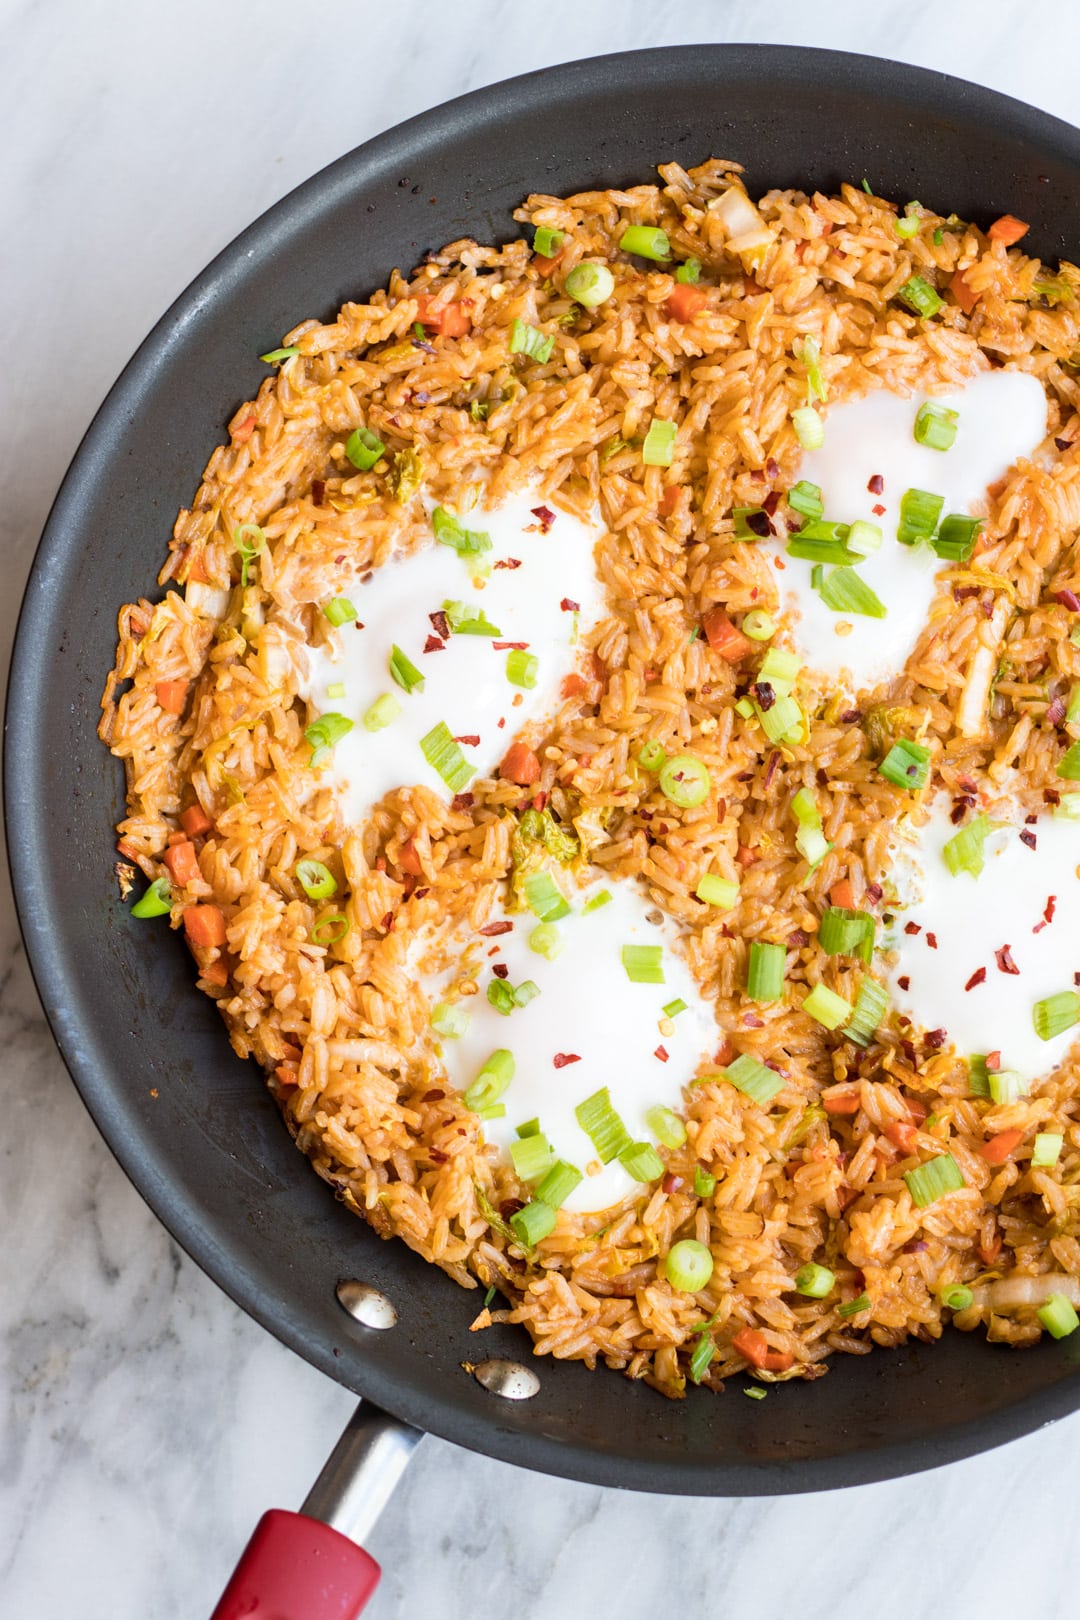 A skillet filled with fried rice and fried eggs topped with sliced green onion tops and red chili flakes.